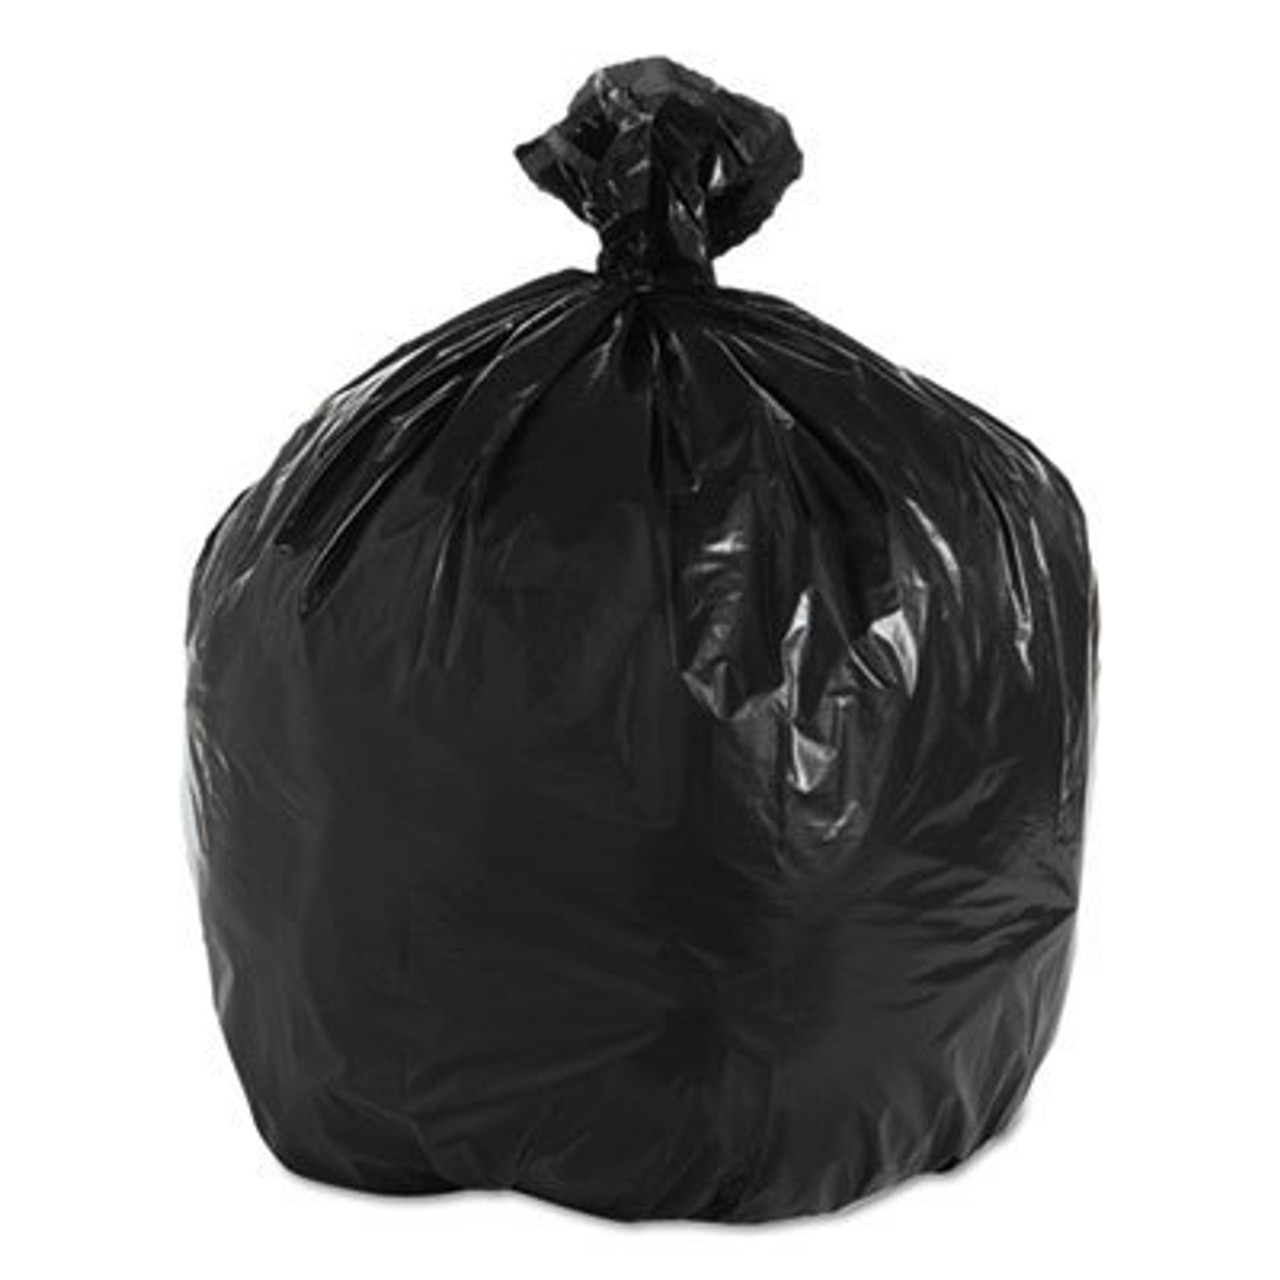 20 To 30 Gallon Bulk Trash Bags | Wholesale Janitorial Supply